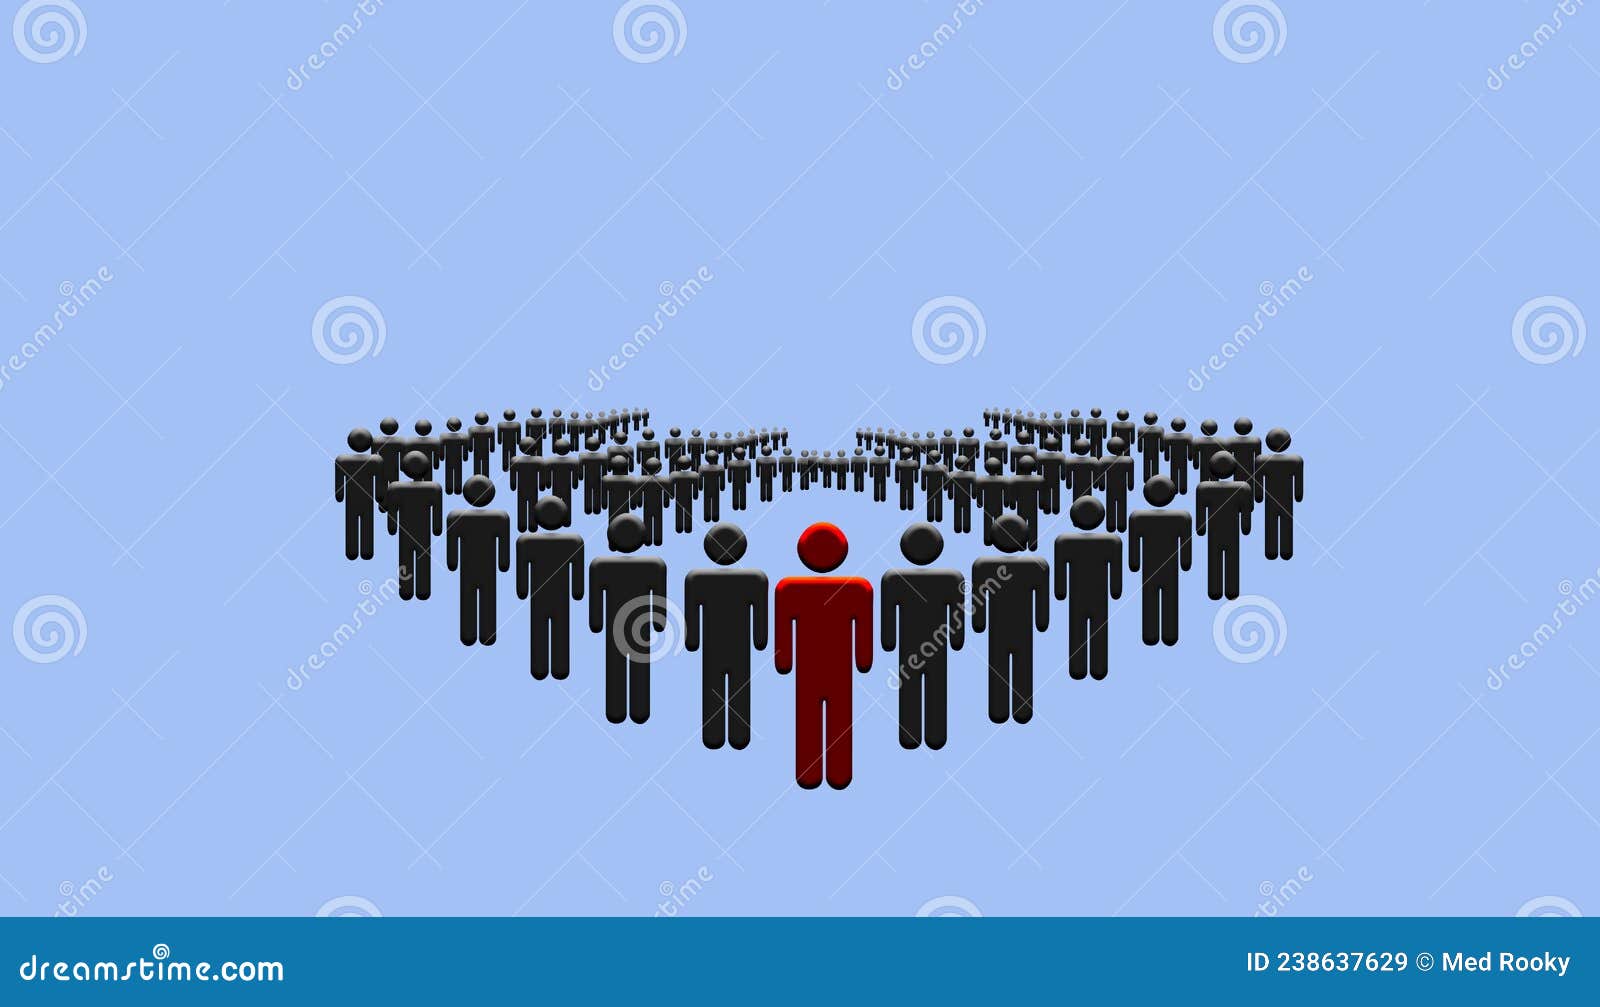 headman leads the crowd concept. organized people with leader unique man. leadership and community concept